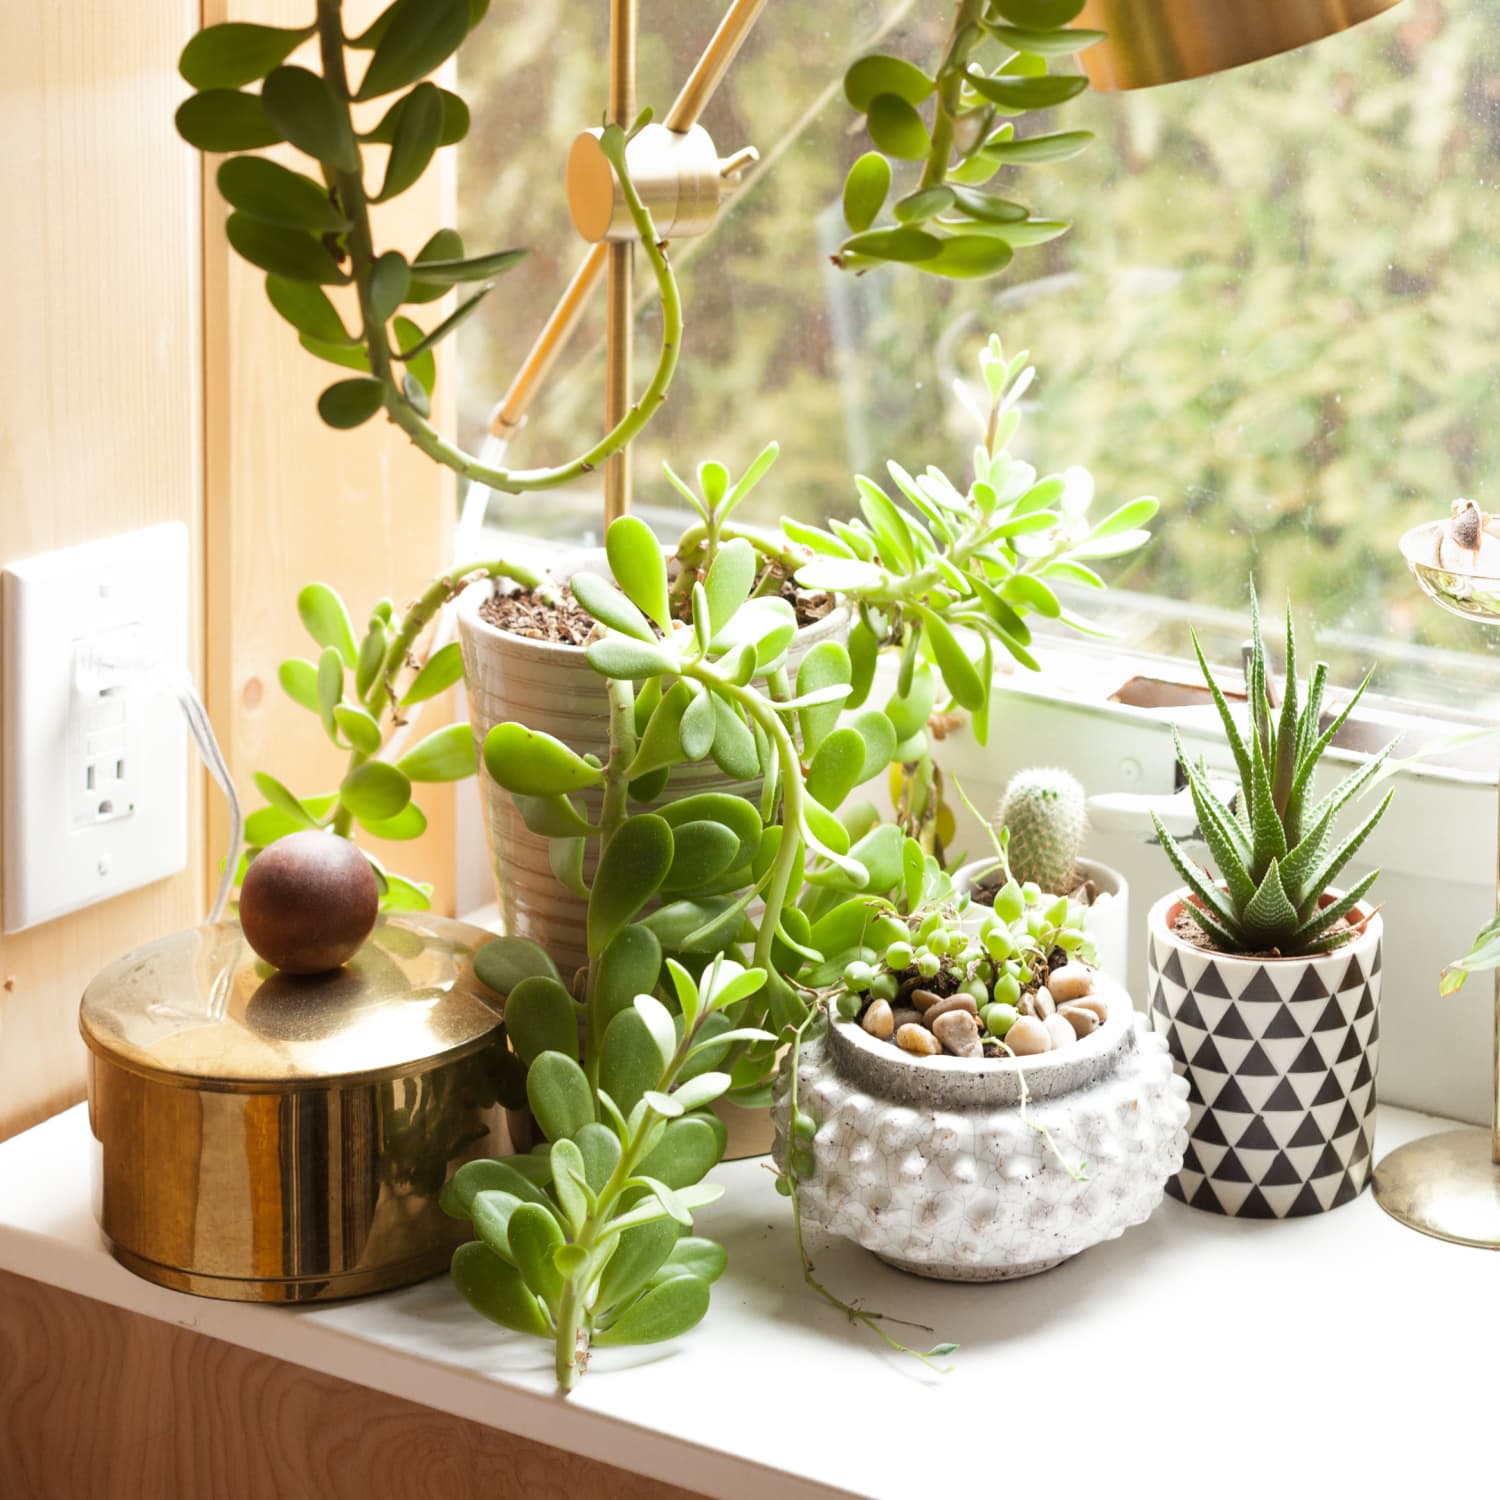 12 budget-friendly sources for buying plants online | apartment